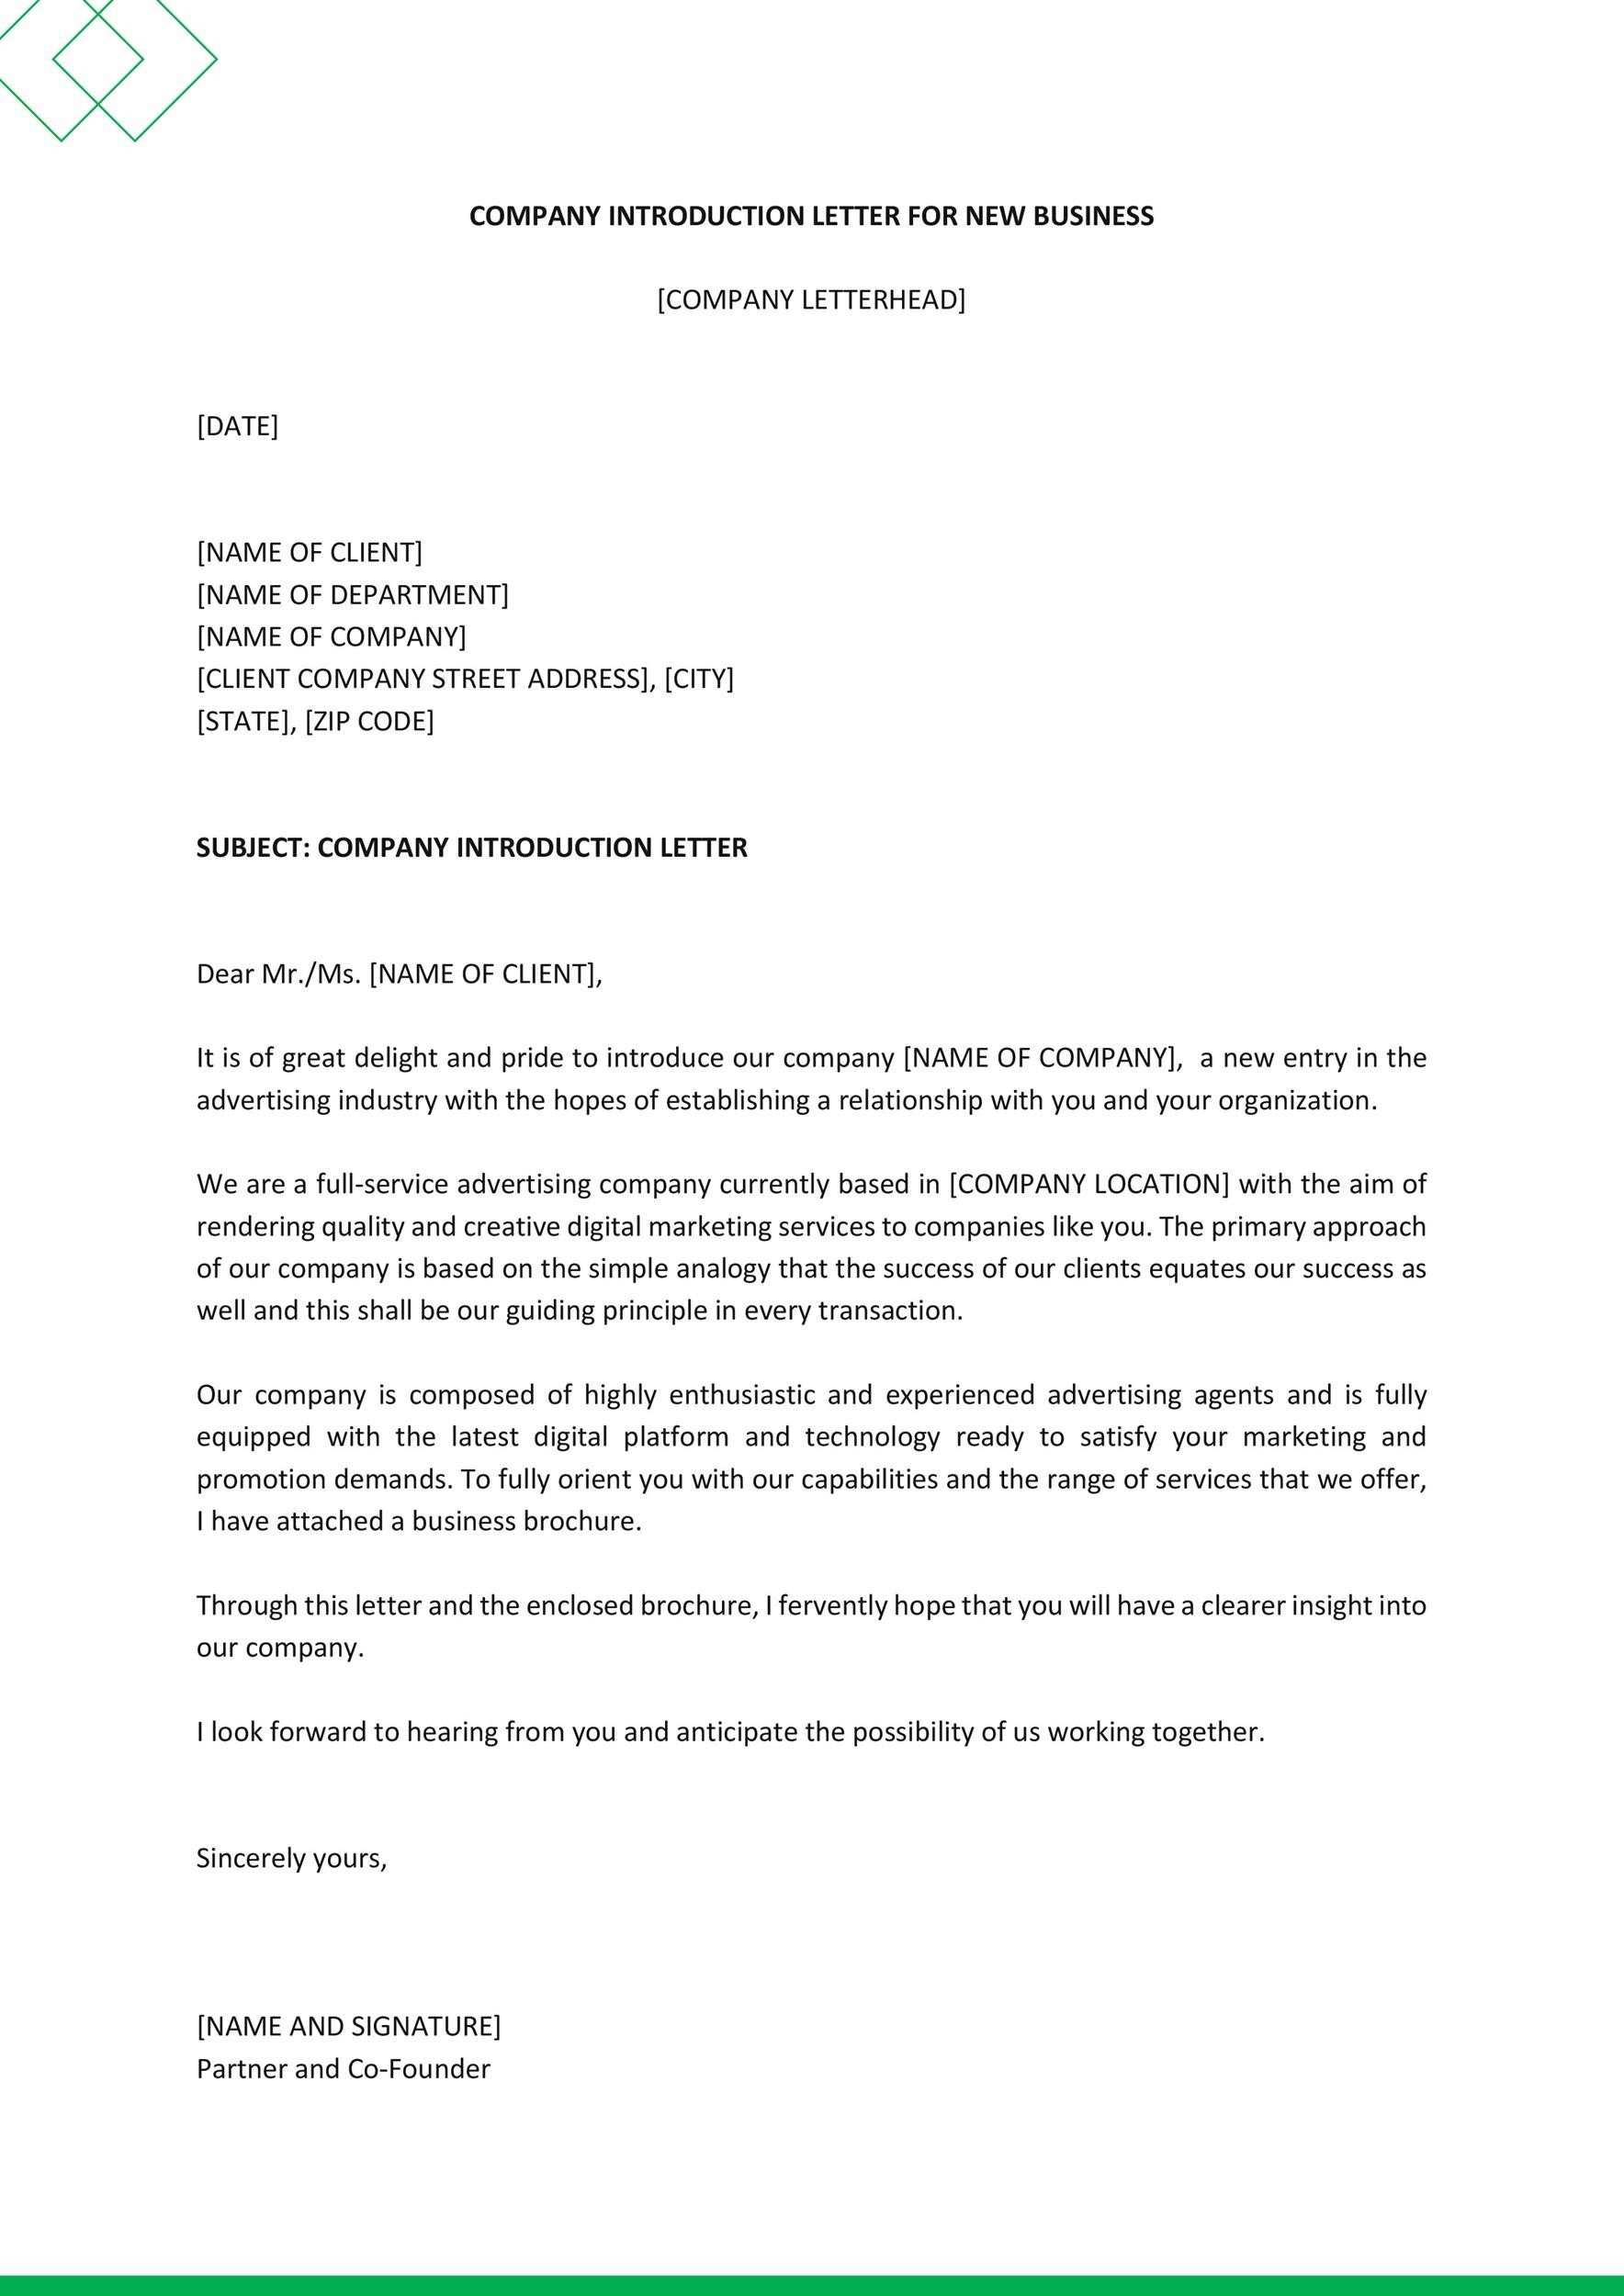 Letter for a company presentation Excellent Company's